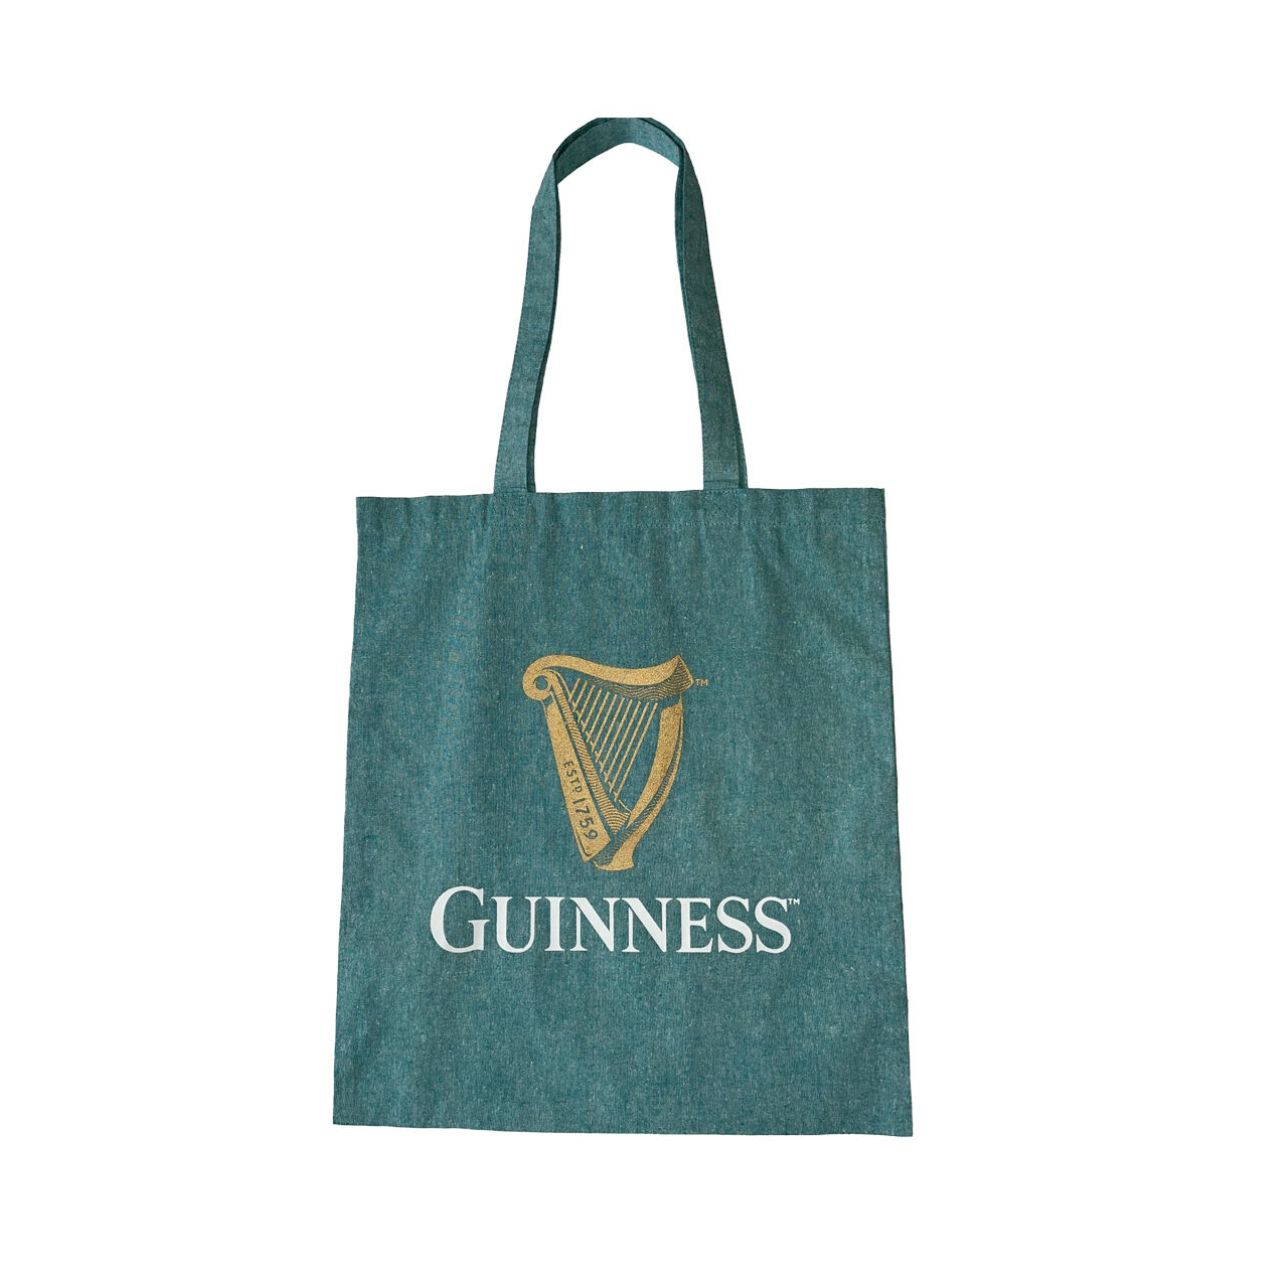 This trendy Guinness Harp tote bag is designed for individuals who enjoy completing tasks or carrying items such as books in a fashionable manner. It also makes a great gift for fans of Guinness.